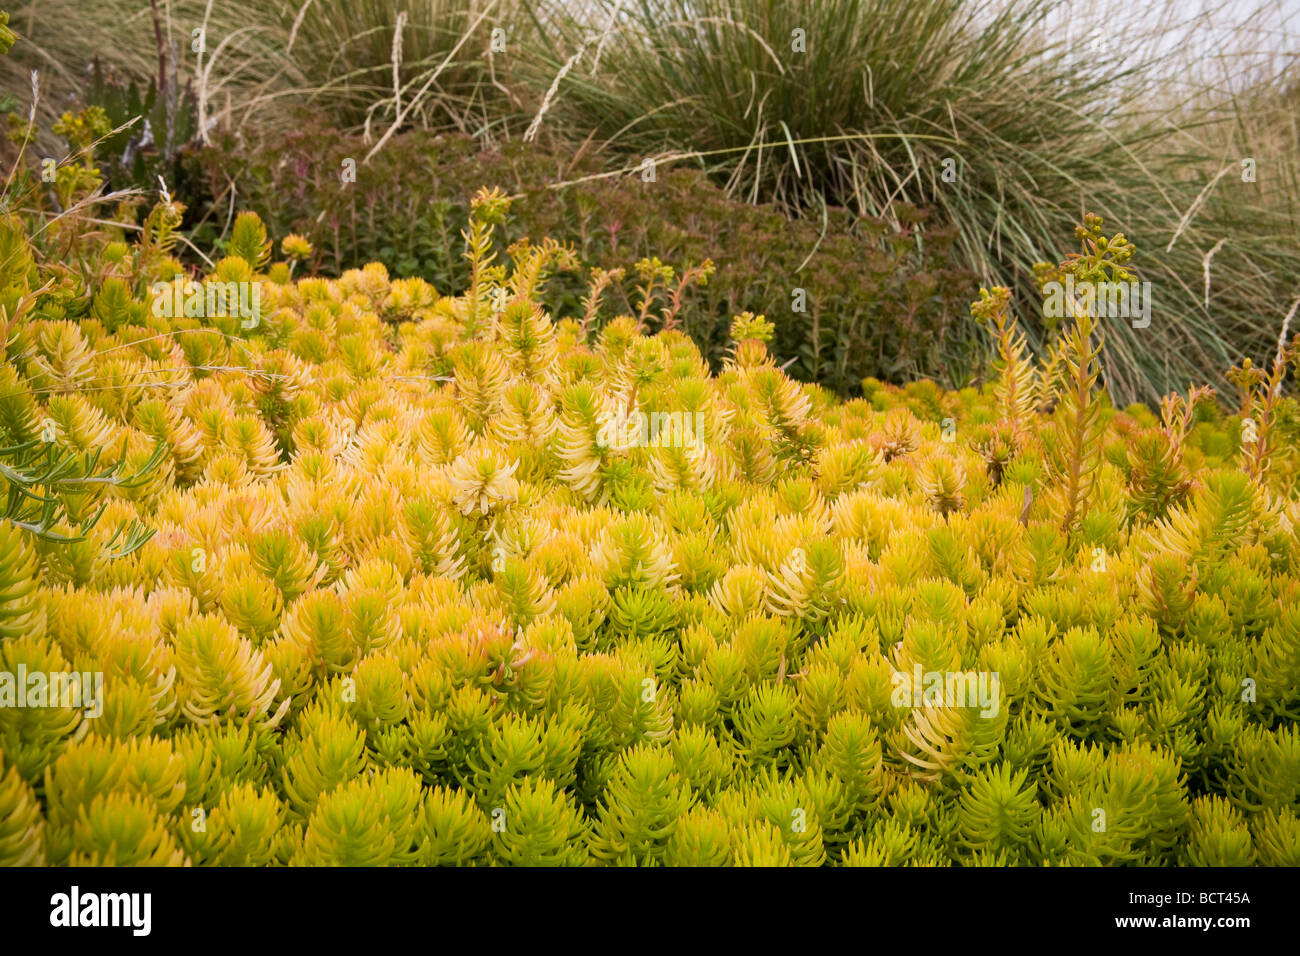 Sedum rupestre Angelina yellow foliage hardy succulent groundcover with grasses in drought tolerant California garden Stock Photo